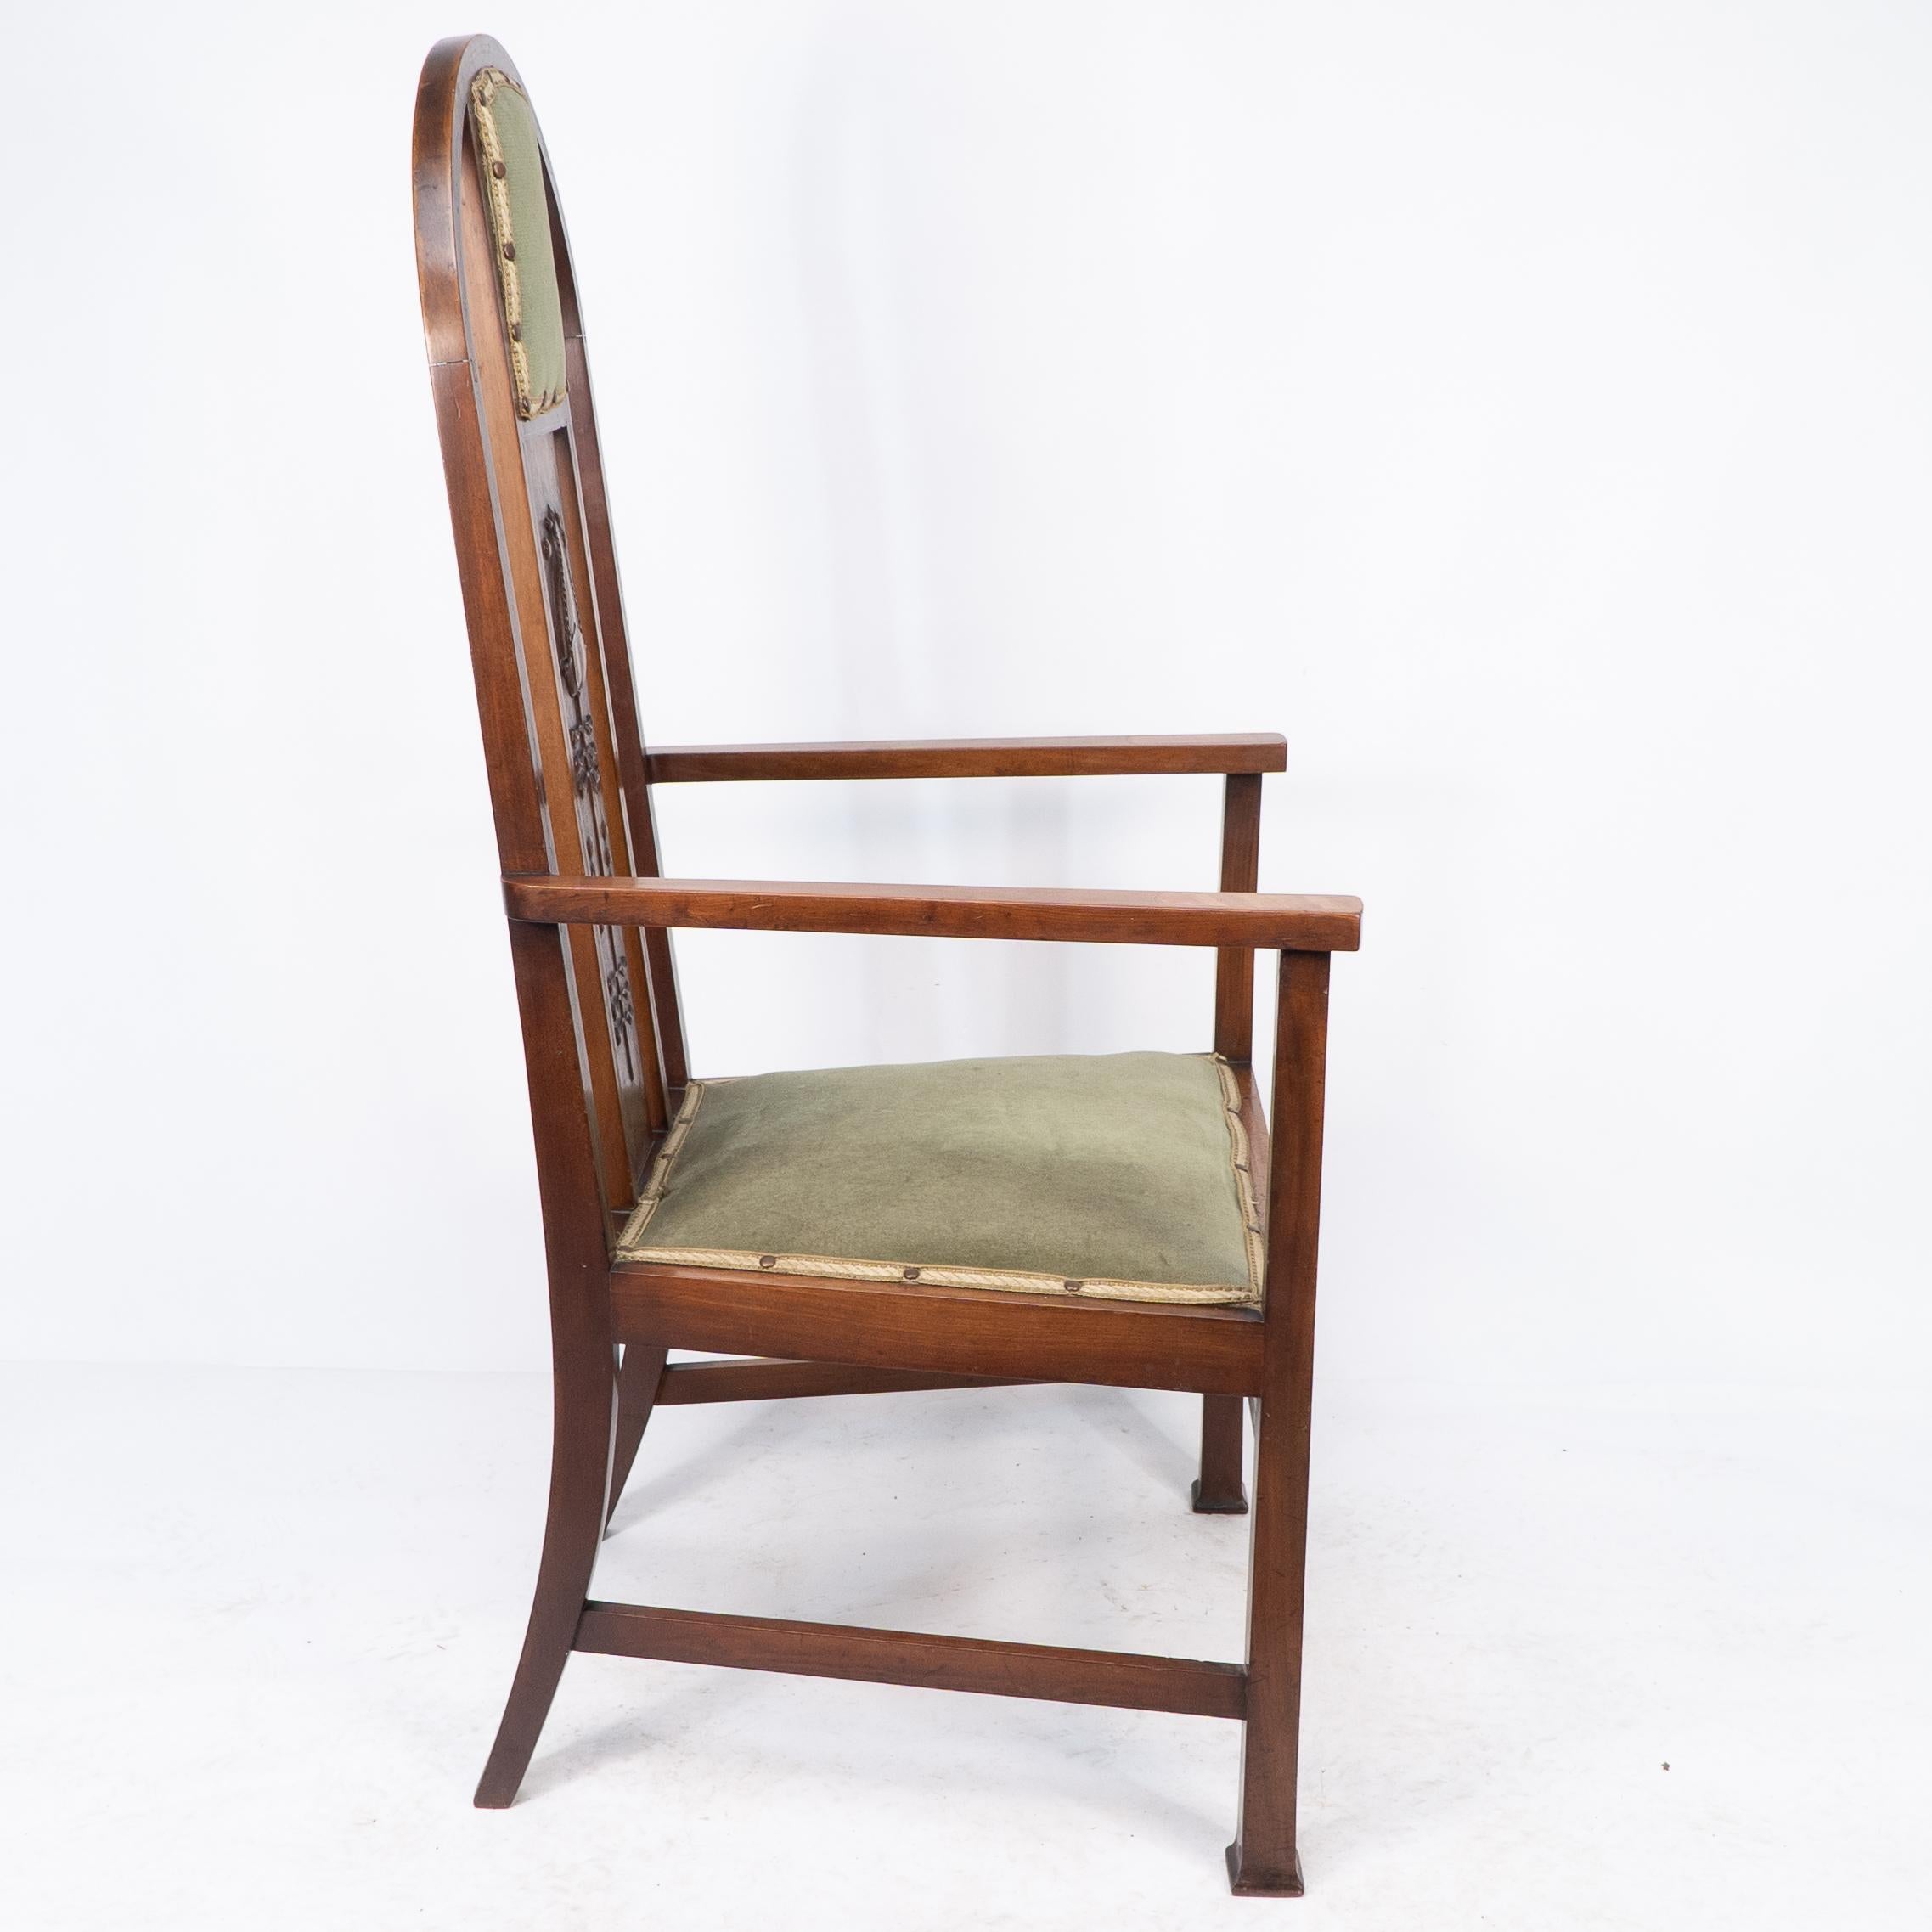 Liberty and Co attri, A Pair of Arts and Crafts mahogany and Inlaid Armchair In Good Condition For Sale In London, GB